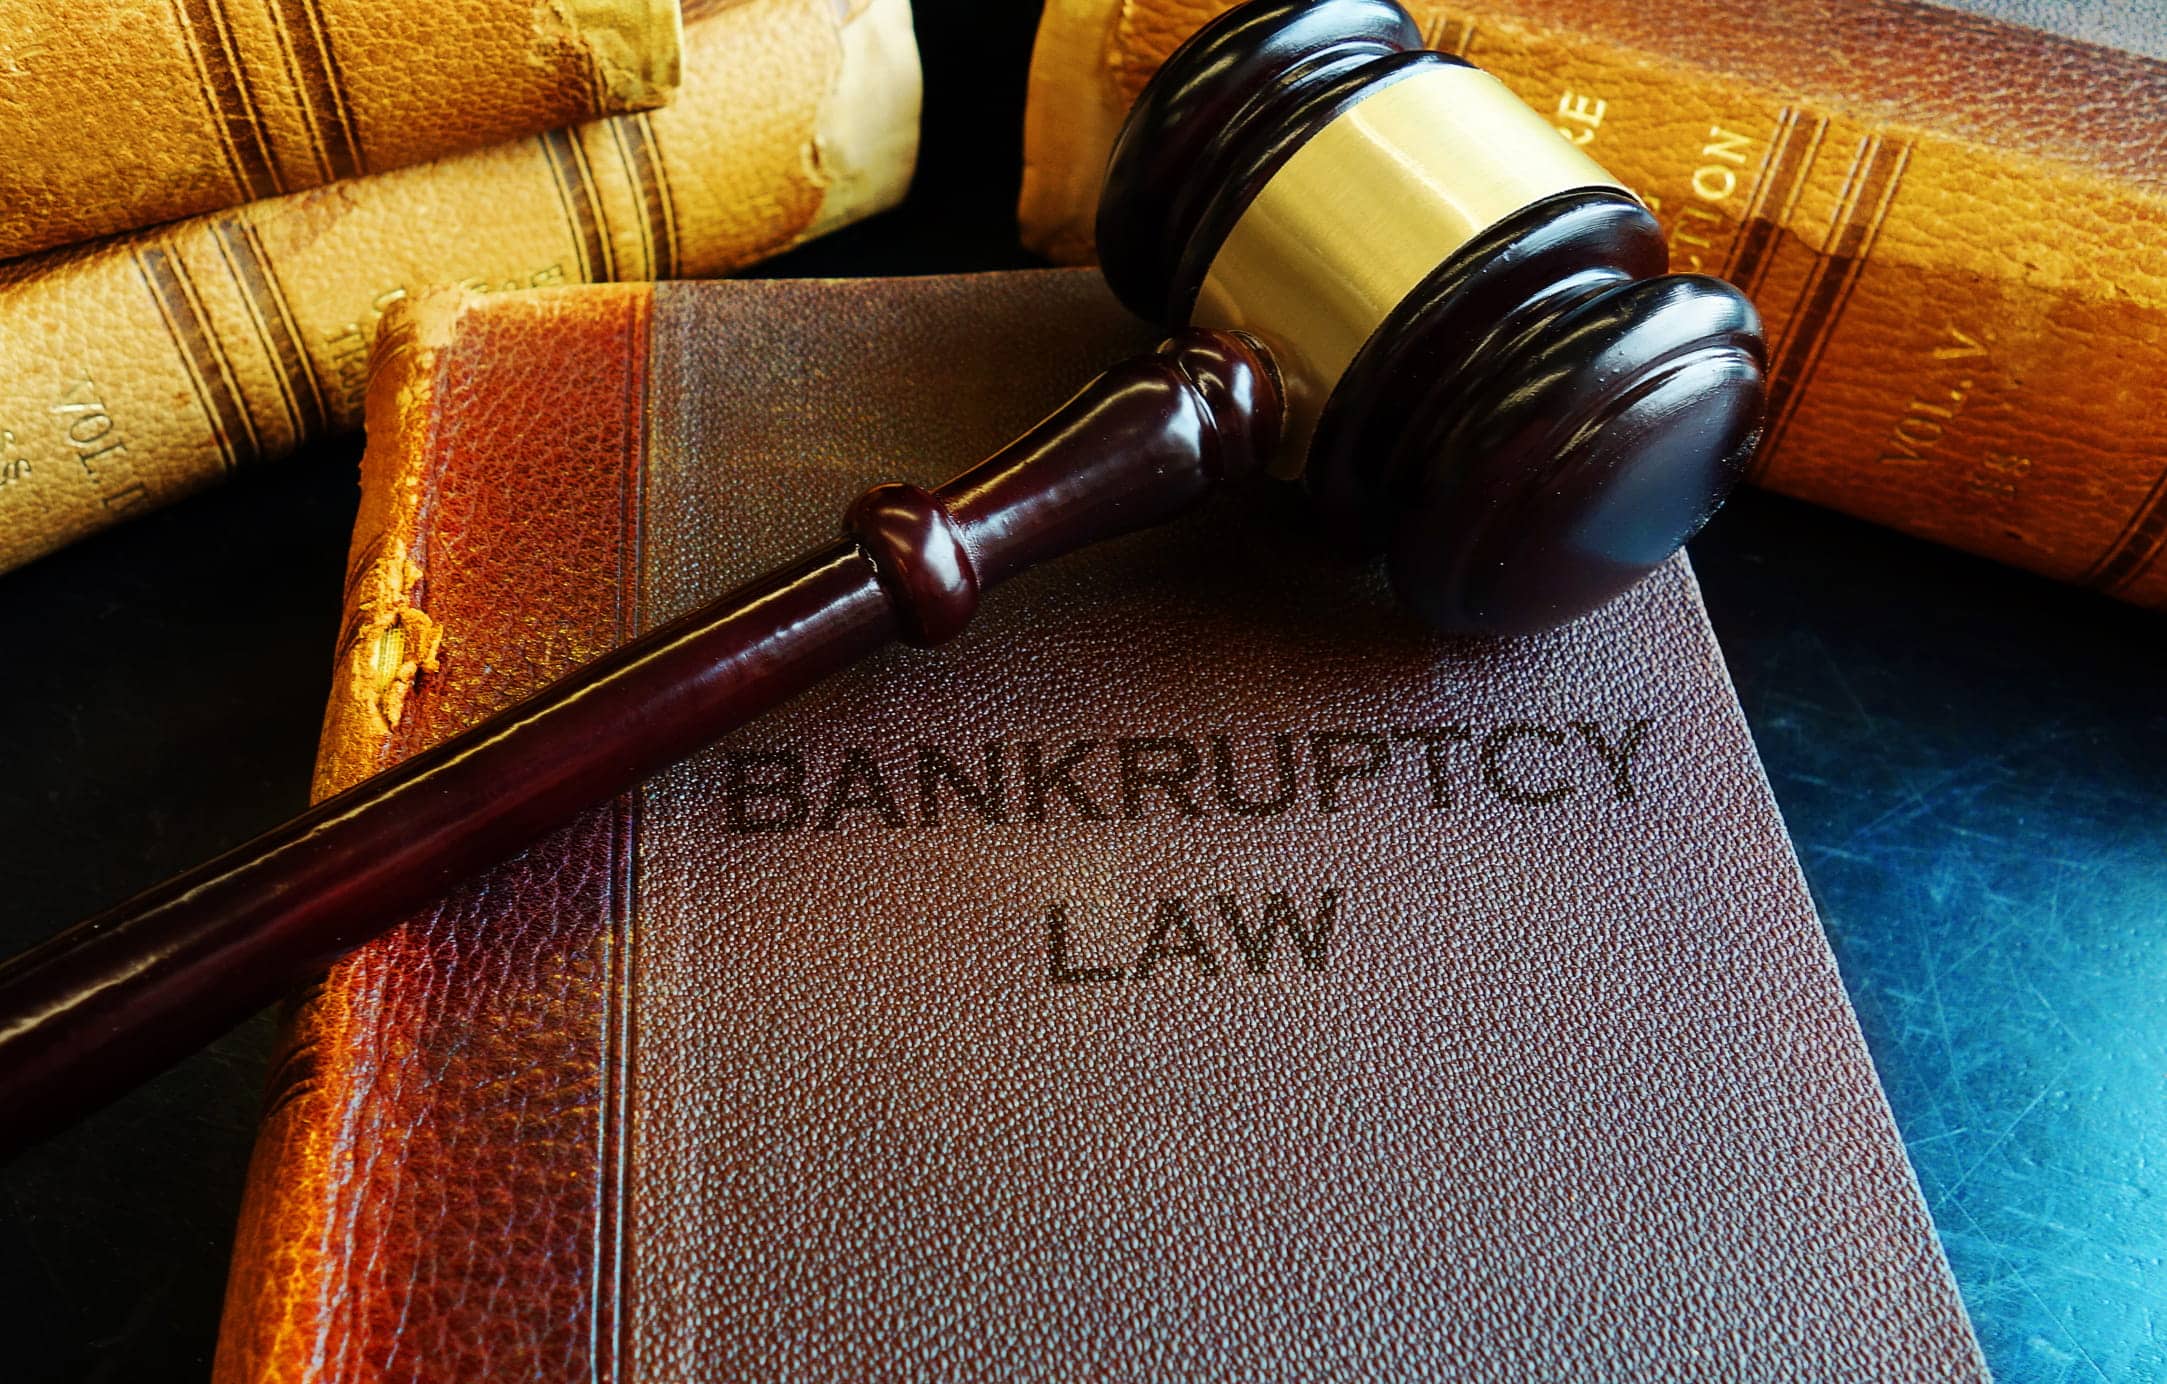 gavel of justice on top of bankruptcy law book